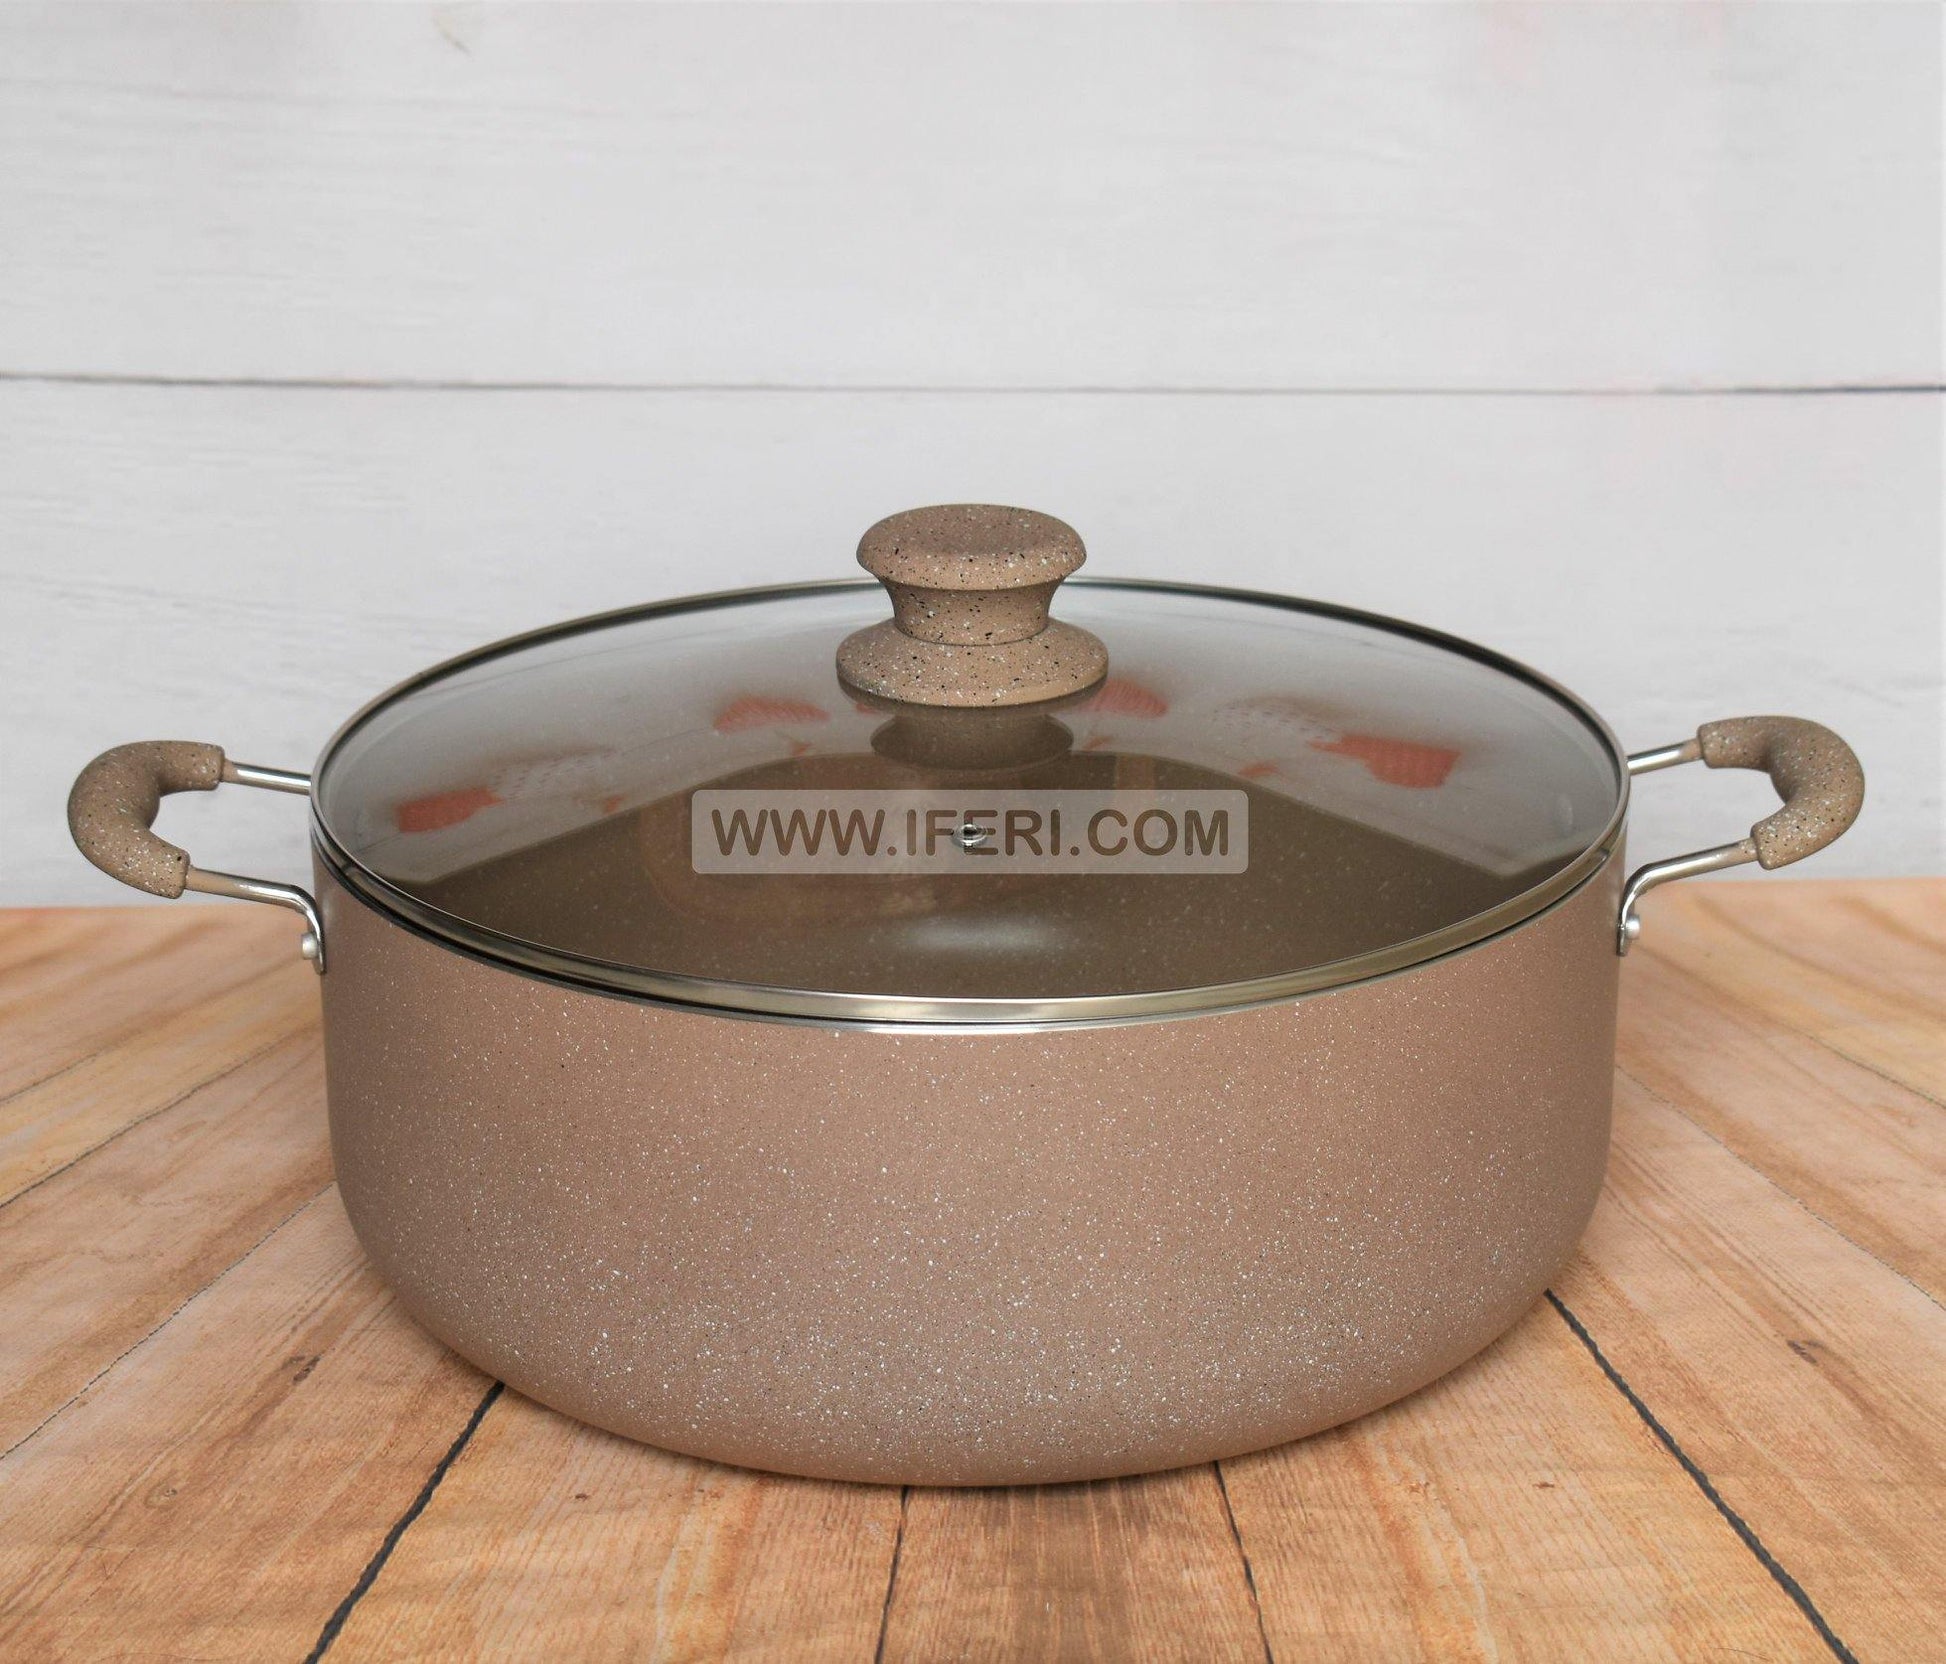 34cm Marble Coating Cookware with Lid UT8214 - Price in BD at iferi.com